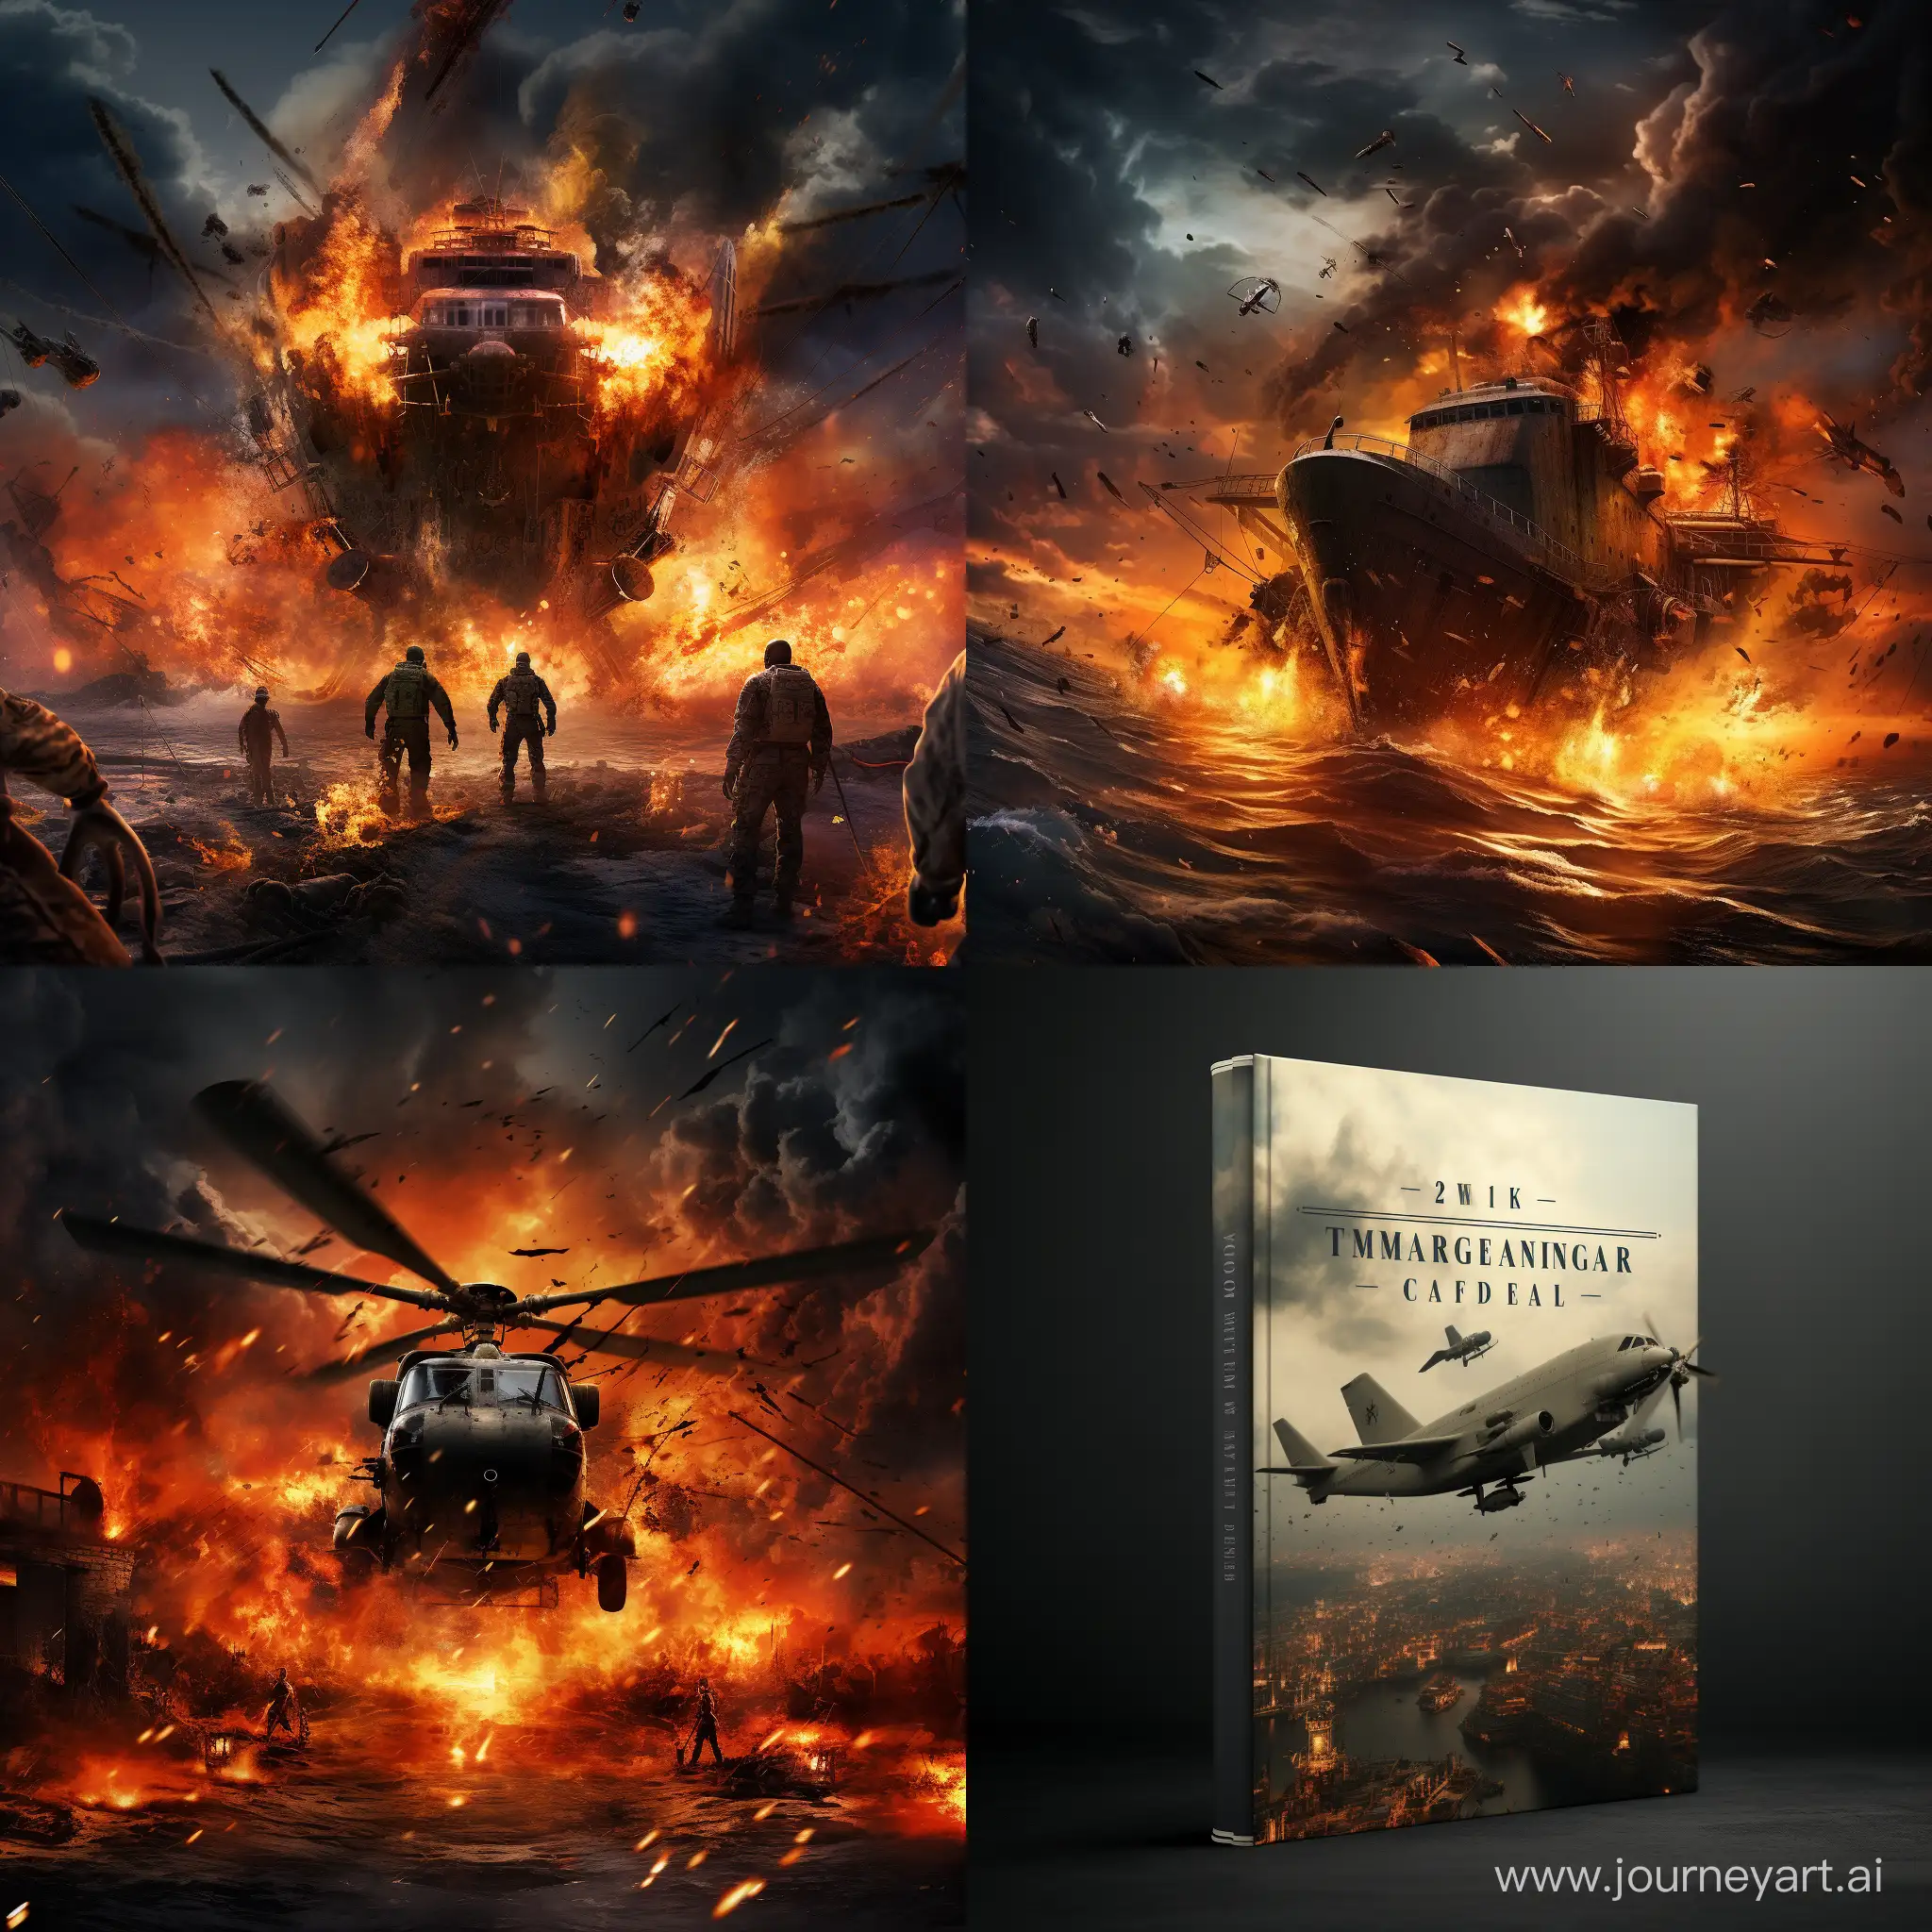 Epic-Book-Cover-WORLD-UNDER-ATTACK-Depicts-Intense-Marine-and-Aircraft-Warfare